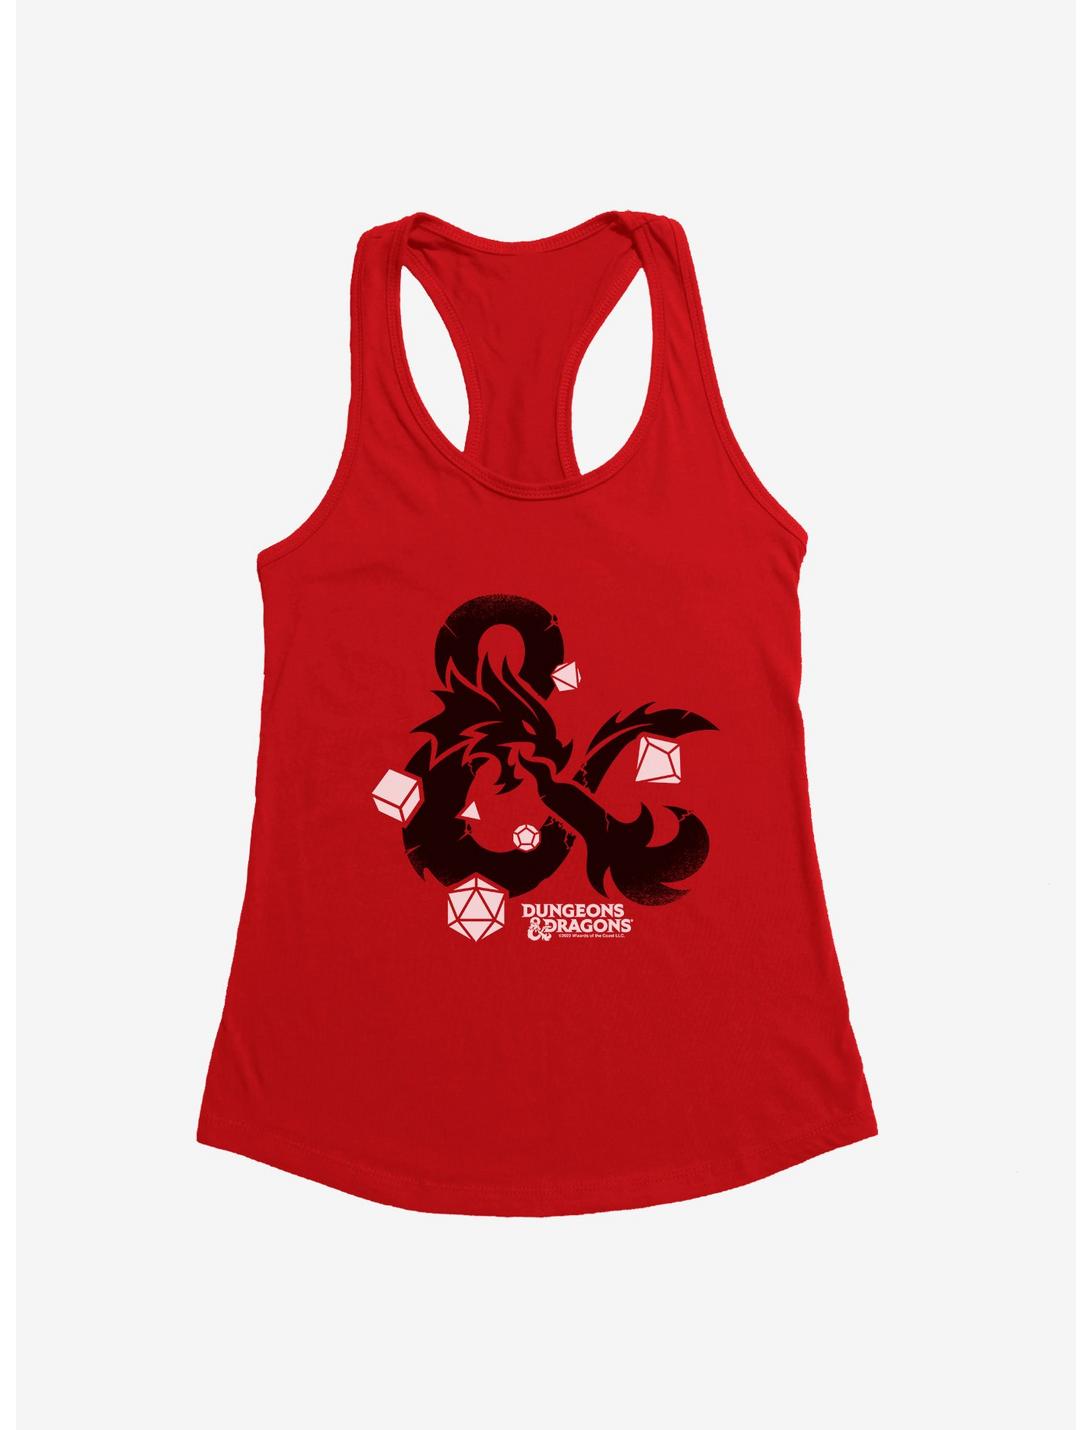 Dungeons & Dragons Dice Set Ampersand Womens Tank Top, RED, hi-res